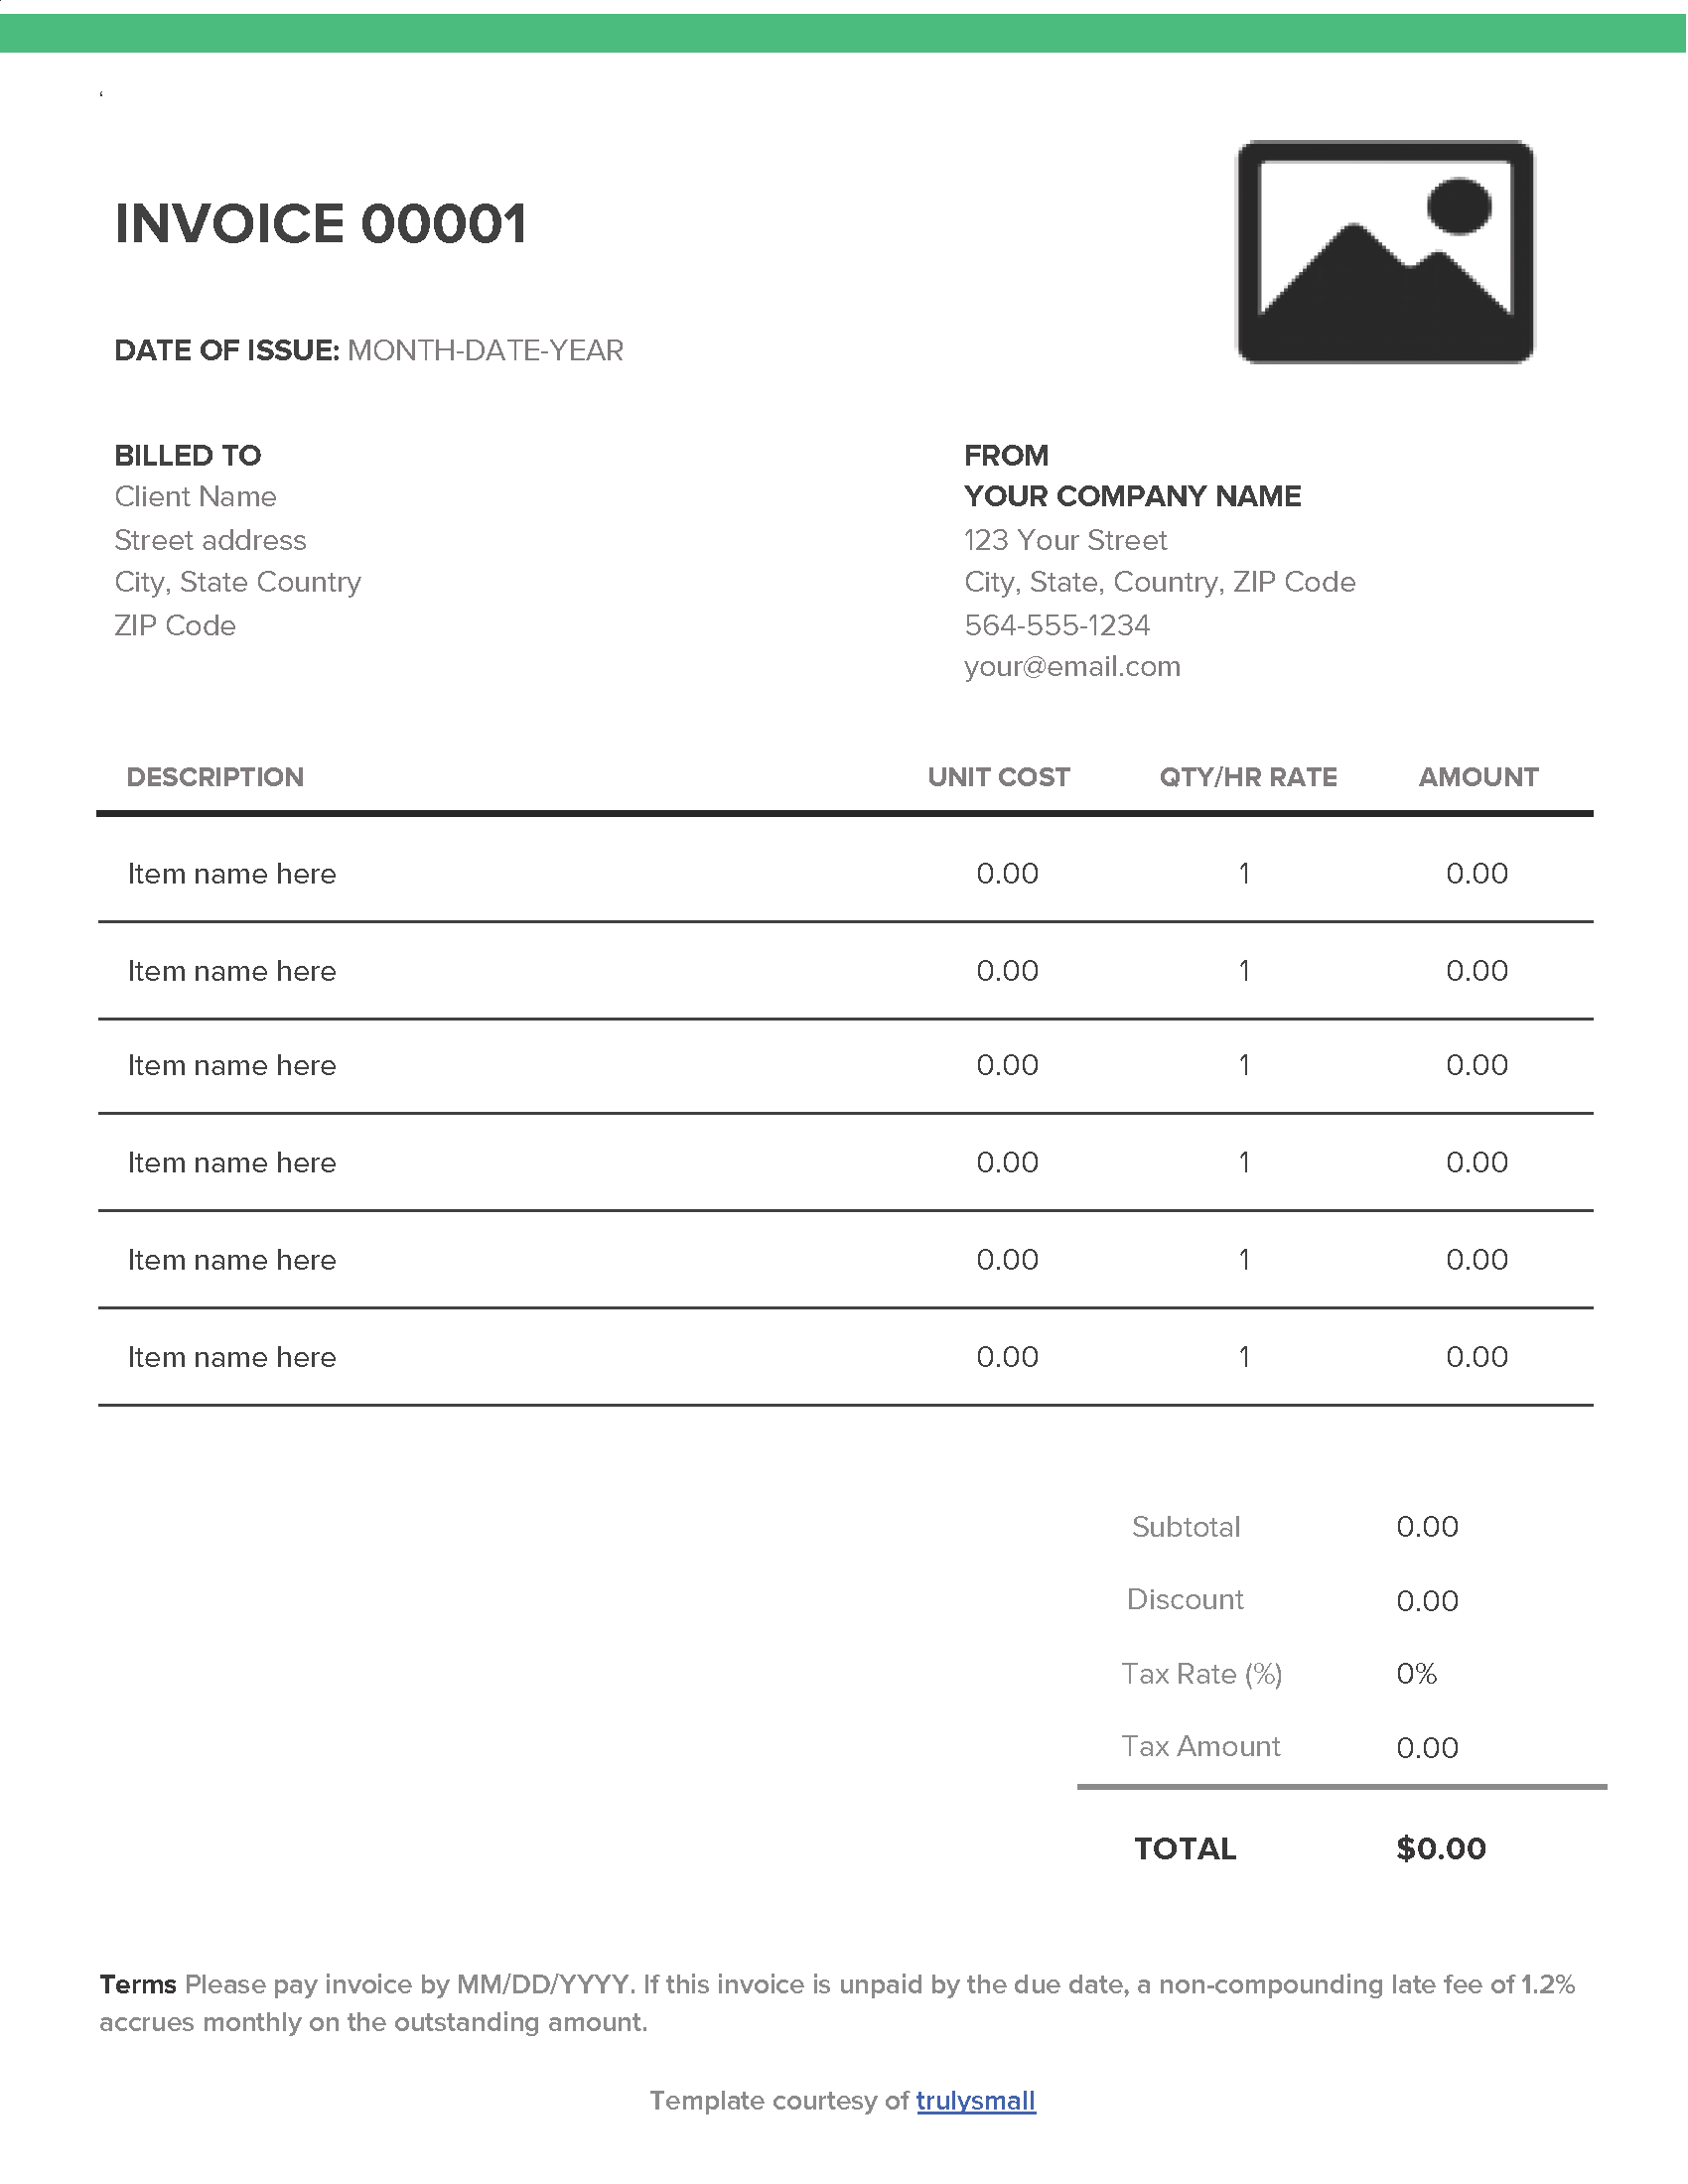 Free Business Invoice Templates - TrulySmall Within Net 30 Invoice Template